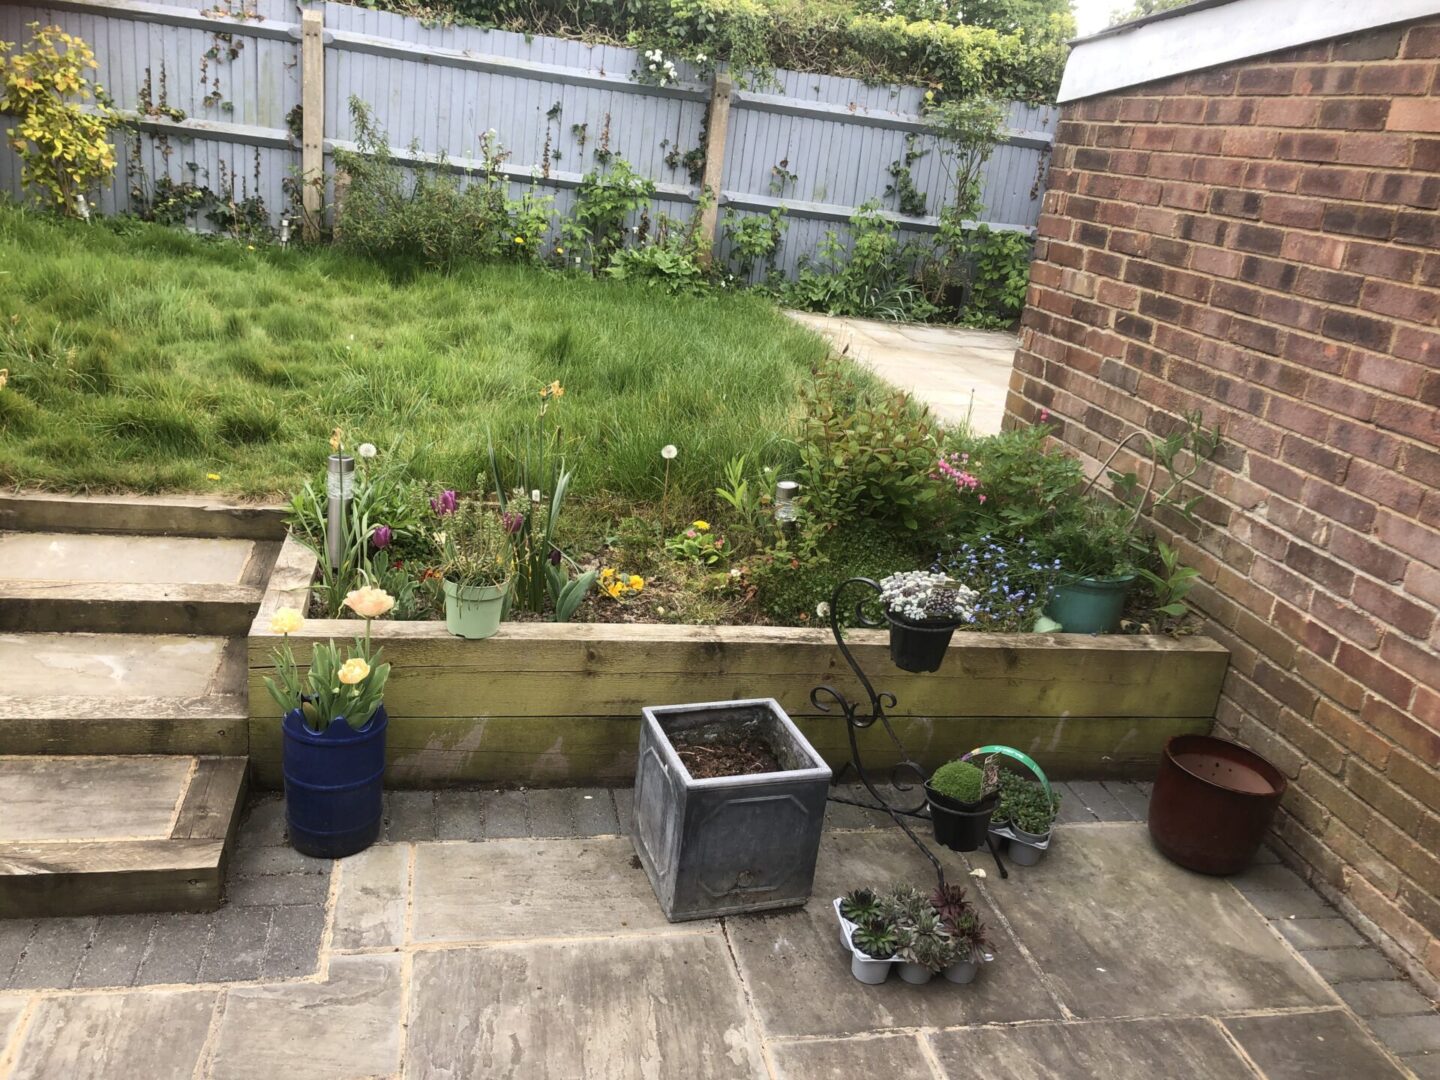 The garden before works